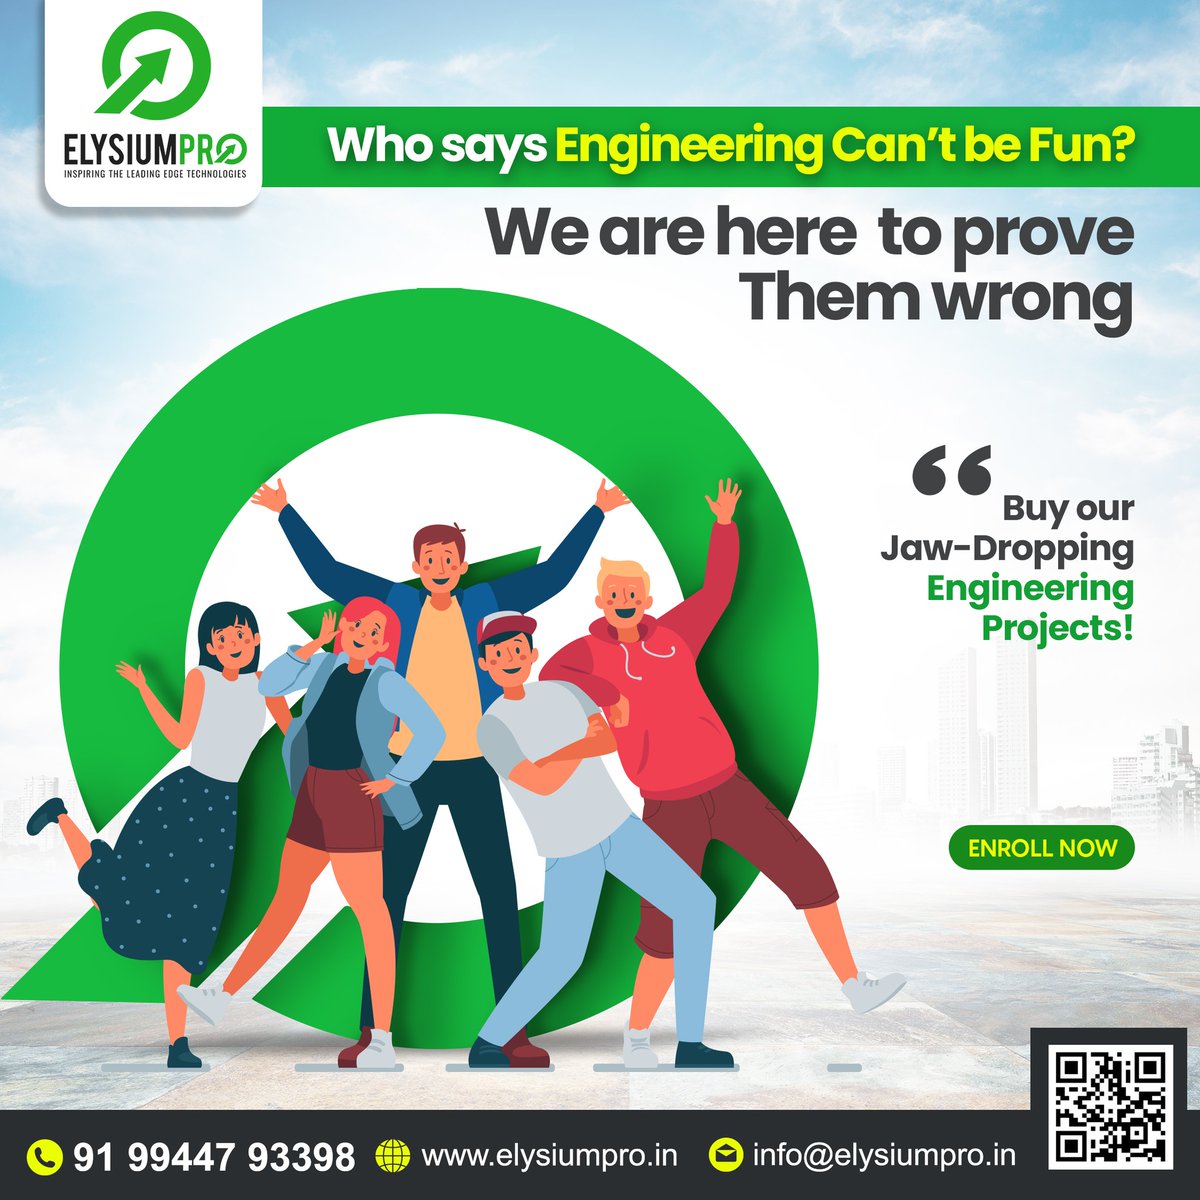 🎍 Searching for the ideal way to wrap out your engineering career?
#elysiumpro #internshipopportunity #internshipstudent #WhatsApp #finalyearproject #Telegram #internshiptraining #IEEEprojects #finalyearproject #bestfinalyearproject #bestfinalyearprojectinstitute